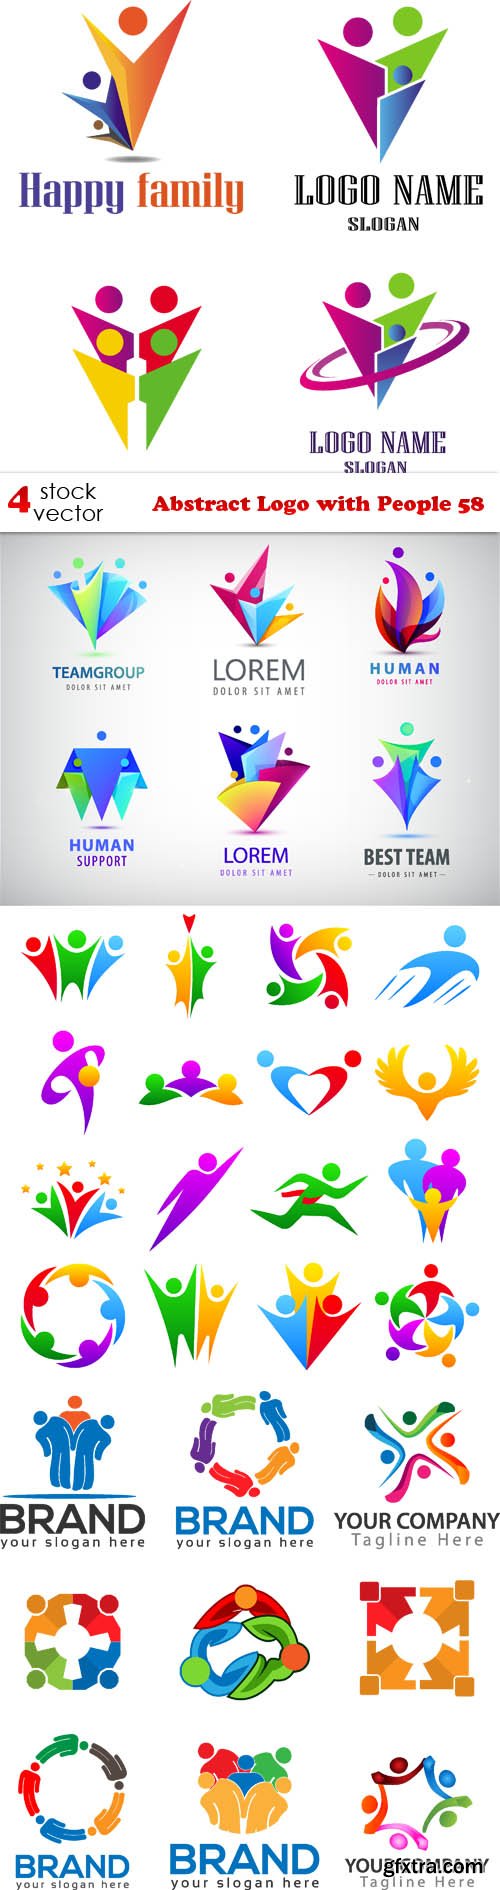 Vectors - Abstract Logo with People 58